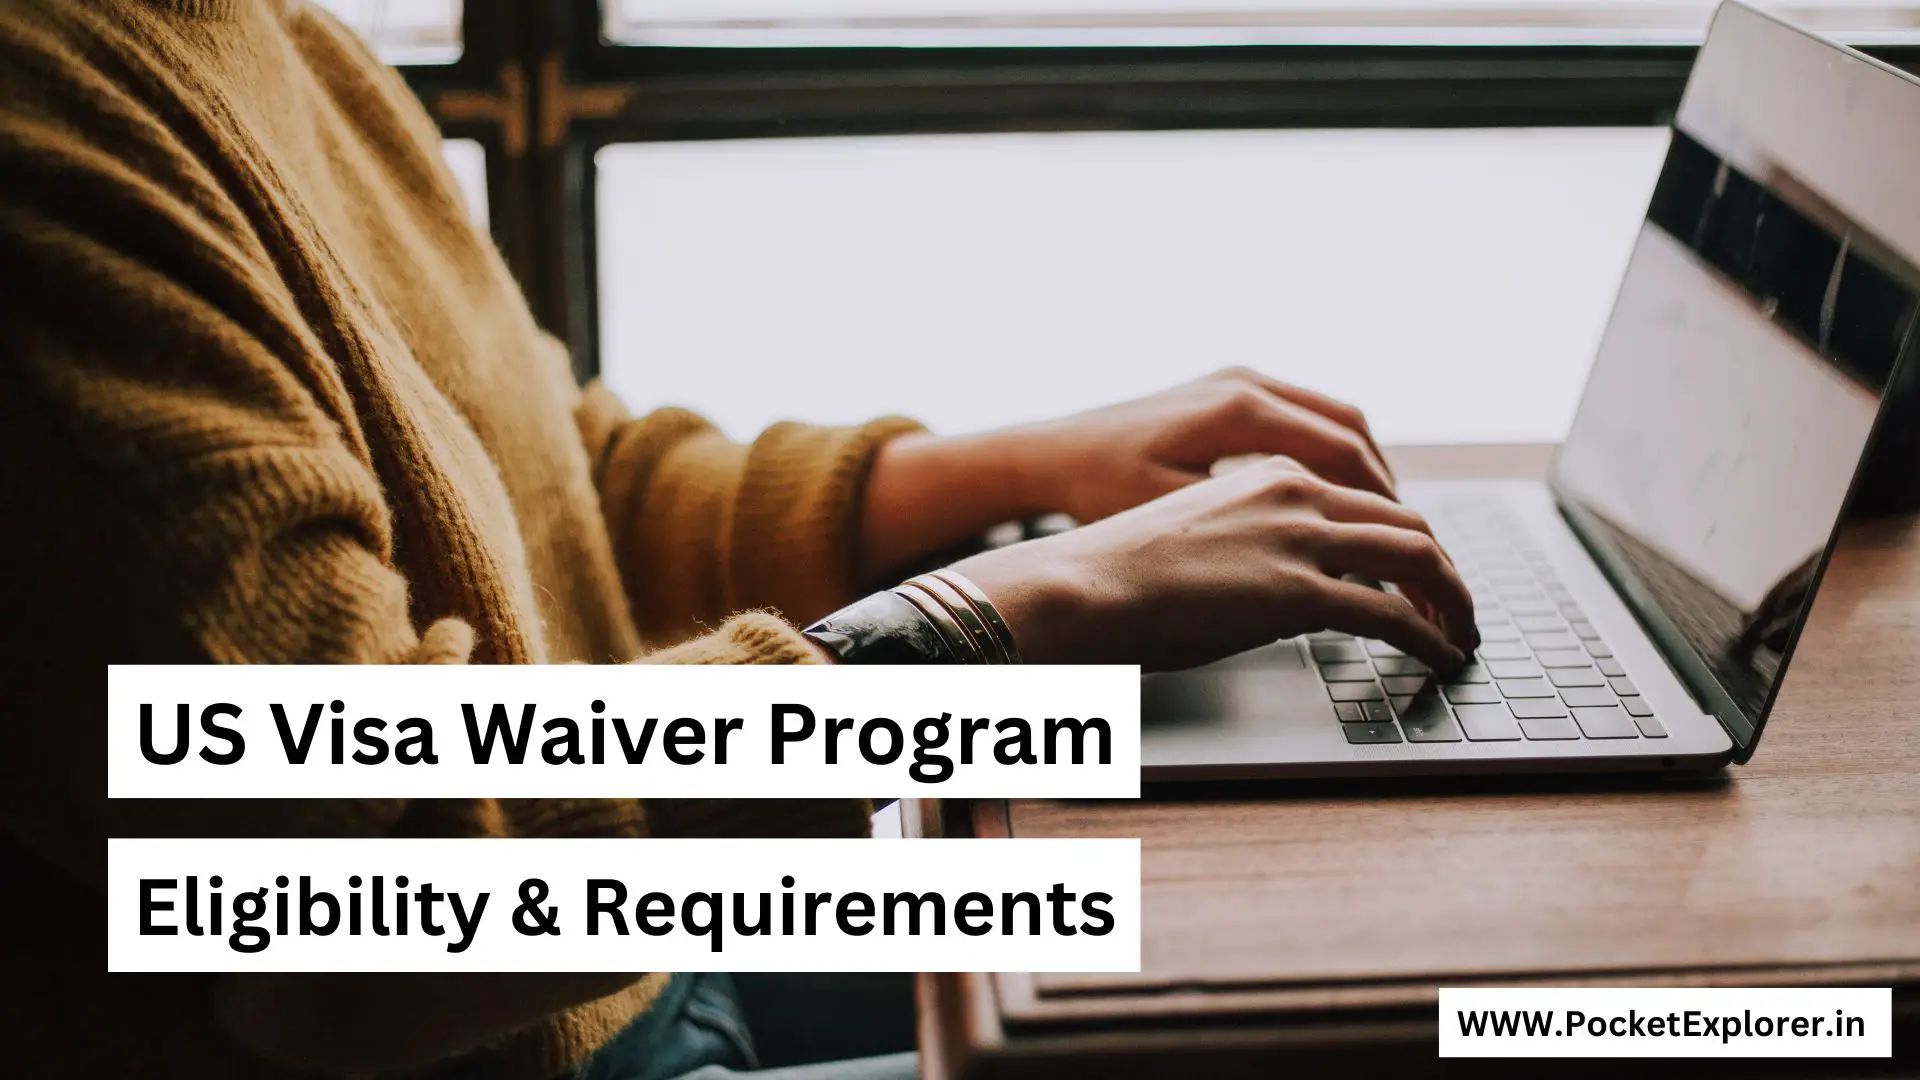 US visa waiver program eligibility and requirements